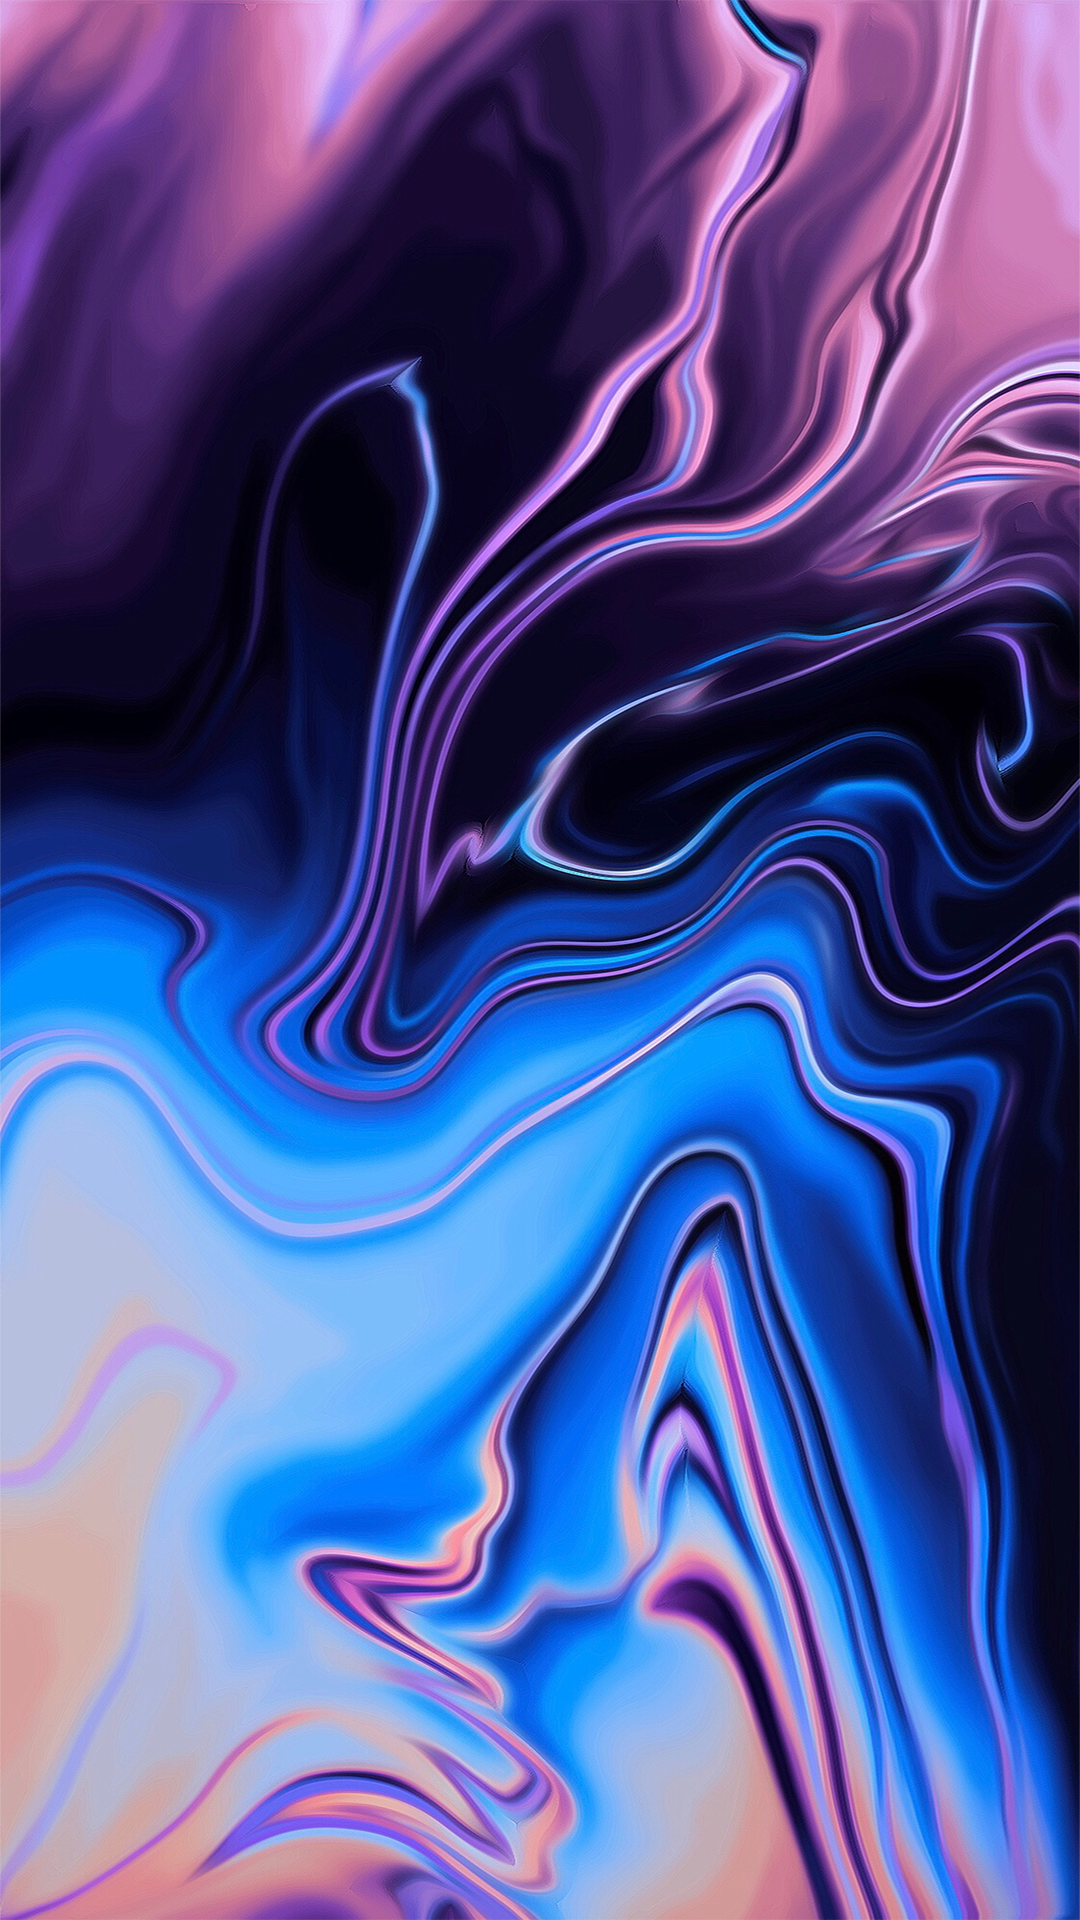 New MacBook Pro-inspired wallpapers for iPhone